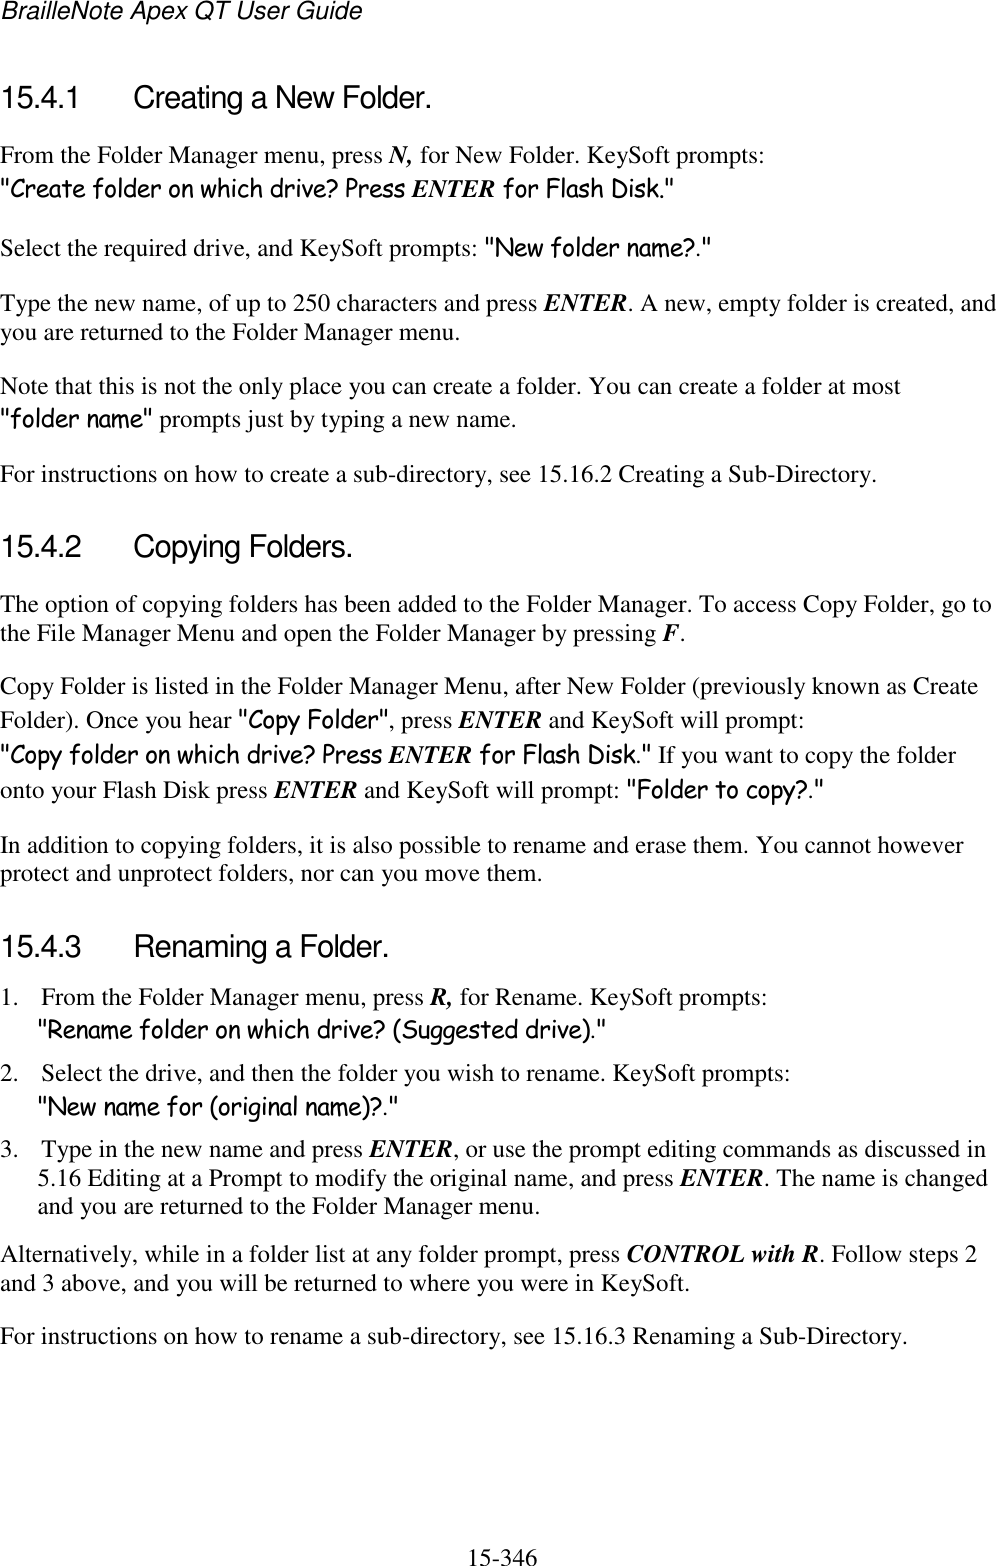 BrailleNote Apex QT User Guide  15-346   15.4.1  Creating a New Folder. From the Folder Manager menu, press N, for New Folder. KeySoft prompts: &quot;Create folder on which drive? Press ENTER for Flash Disk.&quot; Select the required drive, and KeySoft prompts: &quot;New folder name?.&quot; Type the new name, of up to 250 characters and press ENTER. A new, empty folder is created, and you are returned to the Folder Manager menu. Note that this is not the only place you can create a folder. You can create a folder at most &quot;folder name&quot; prompts just by typing a new name. For instructions on how to create a sub-directory, see 15.16.2 Creating a Sub-Directory.  15.4.2  Copying Folders. The option of copying folders has been added to the Folder Manager. To access Copy Folder, go to the File Manager Menu and open the Folder Manager by pressing F. Copy Folder is listed in the Folder Manager Menu, after New Folder (previously known as Create Folder). Once you hear &quot;Copy Folder&quot;, press ENTER and KeySoft will prompt: &quot;Copy folder on which drive? Press ENTER for Flash Disk.&quot; If you want to copy the folder onto your Flash Disk press ENTER and KeySoft will prompt: &quot;Folder to copy?.&quot;  In addition to copying folders, it is also possible to rename and erase them. You cannot however protect and unprotect folders, nor can you move them.  15.4.3  Renaming a Folder. 1. From the Folder Manager menu, press R, for Rename. KeySoft prompts: &quot;Rename folder on which drive? (Suggested drive).&quot; 2. Select the drive, and then the folder you wish to rename. KeySoft prompts: &quot;New name for (original name)?.&quot; 3. Type in the new name and press ENTER, or use the prompt editing commands as discussed in 5.16 Editing at a Prompt to modify the original name, and press ENTER. The name is changed and you are returned to the Folder Manager menu. Alternatively, while in a folder list at any folder prompt, press CONTROL with R. Follow steps 2 and 3 above, and you will be returned to where you were in KeySoft. For instructions on how to rename a sub-directory, see 15.16.3 Renaming a Sub-Directory.  